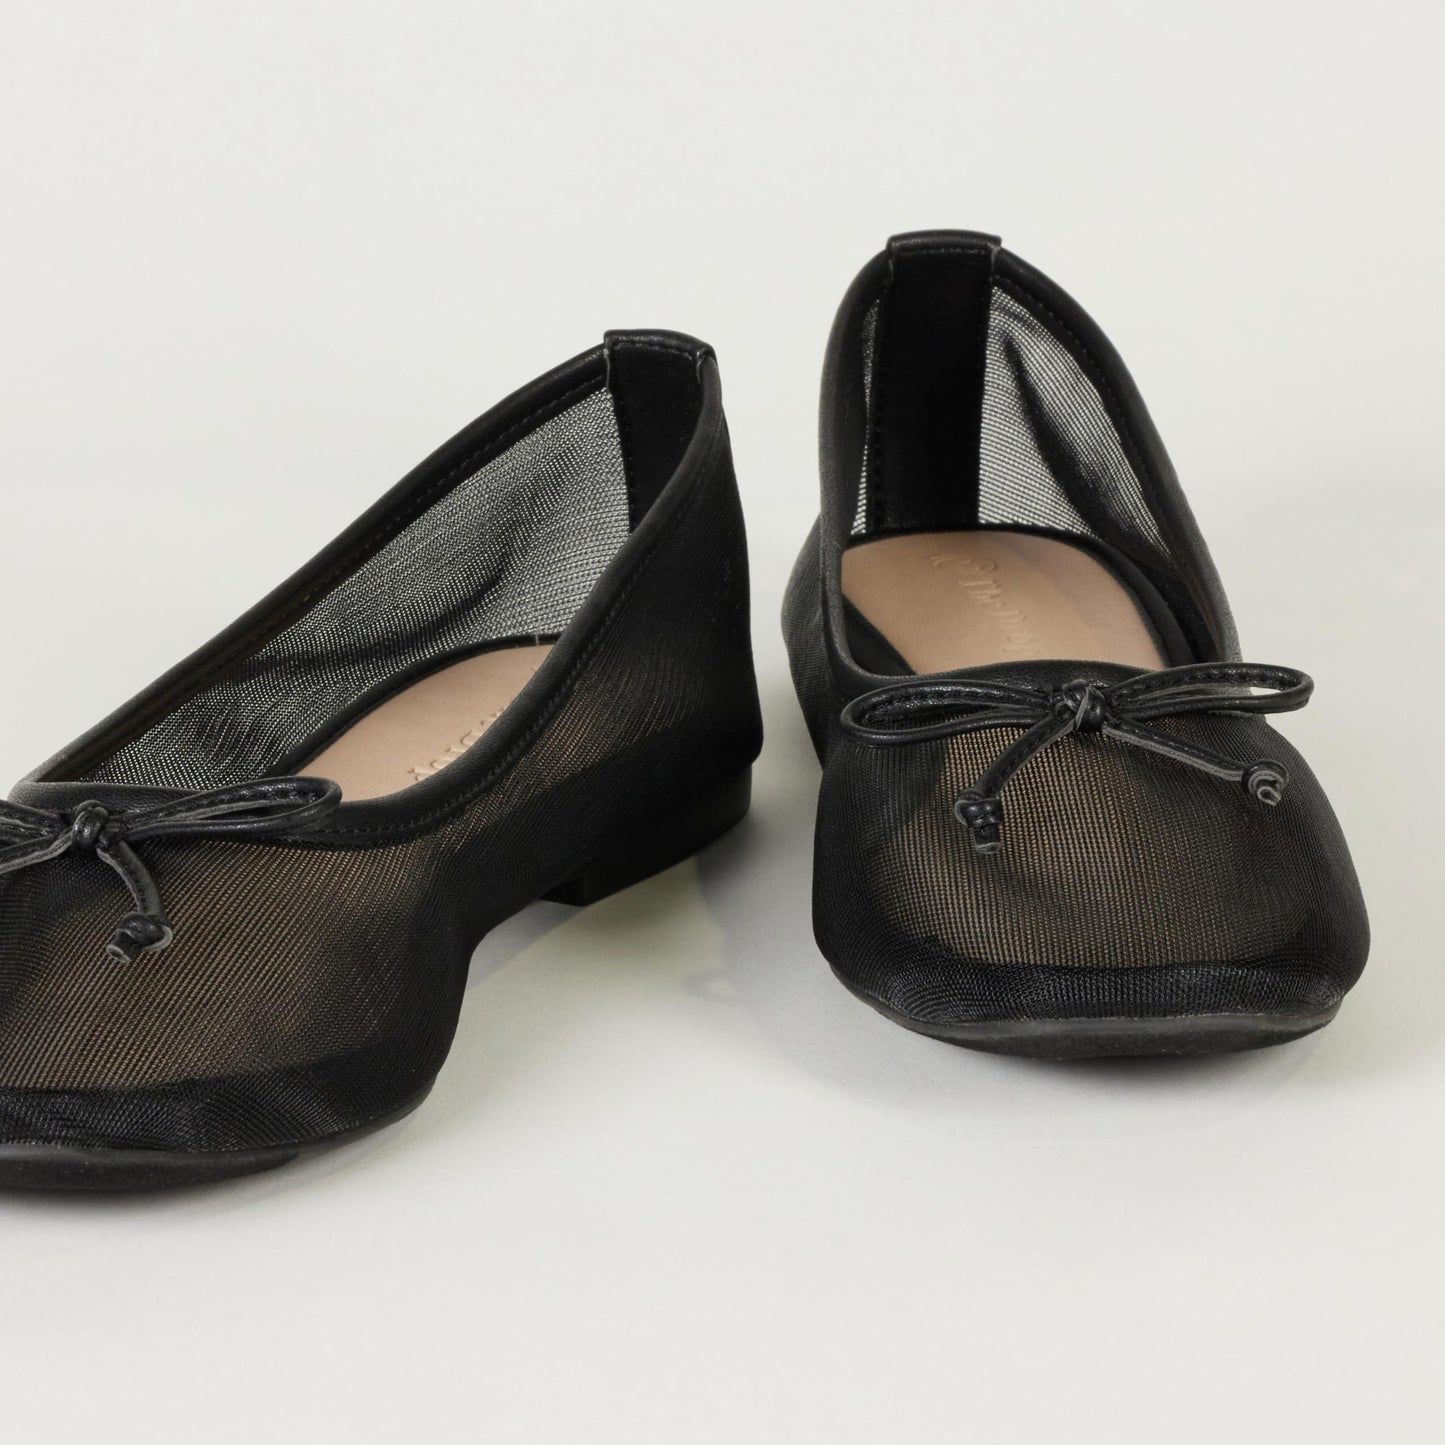 The Drop Women's Pepper Ballet Flat with Bow, Black Mesh